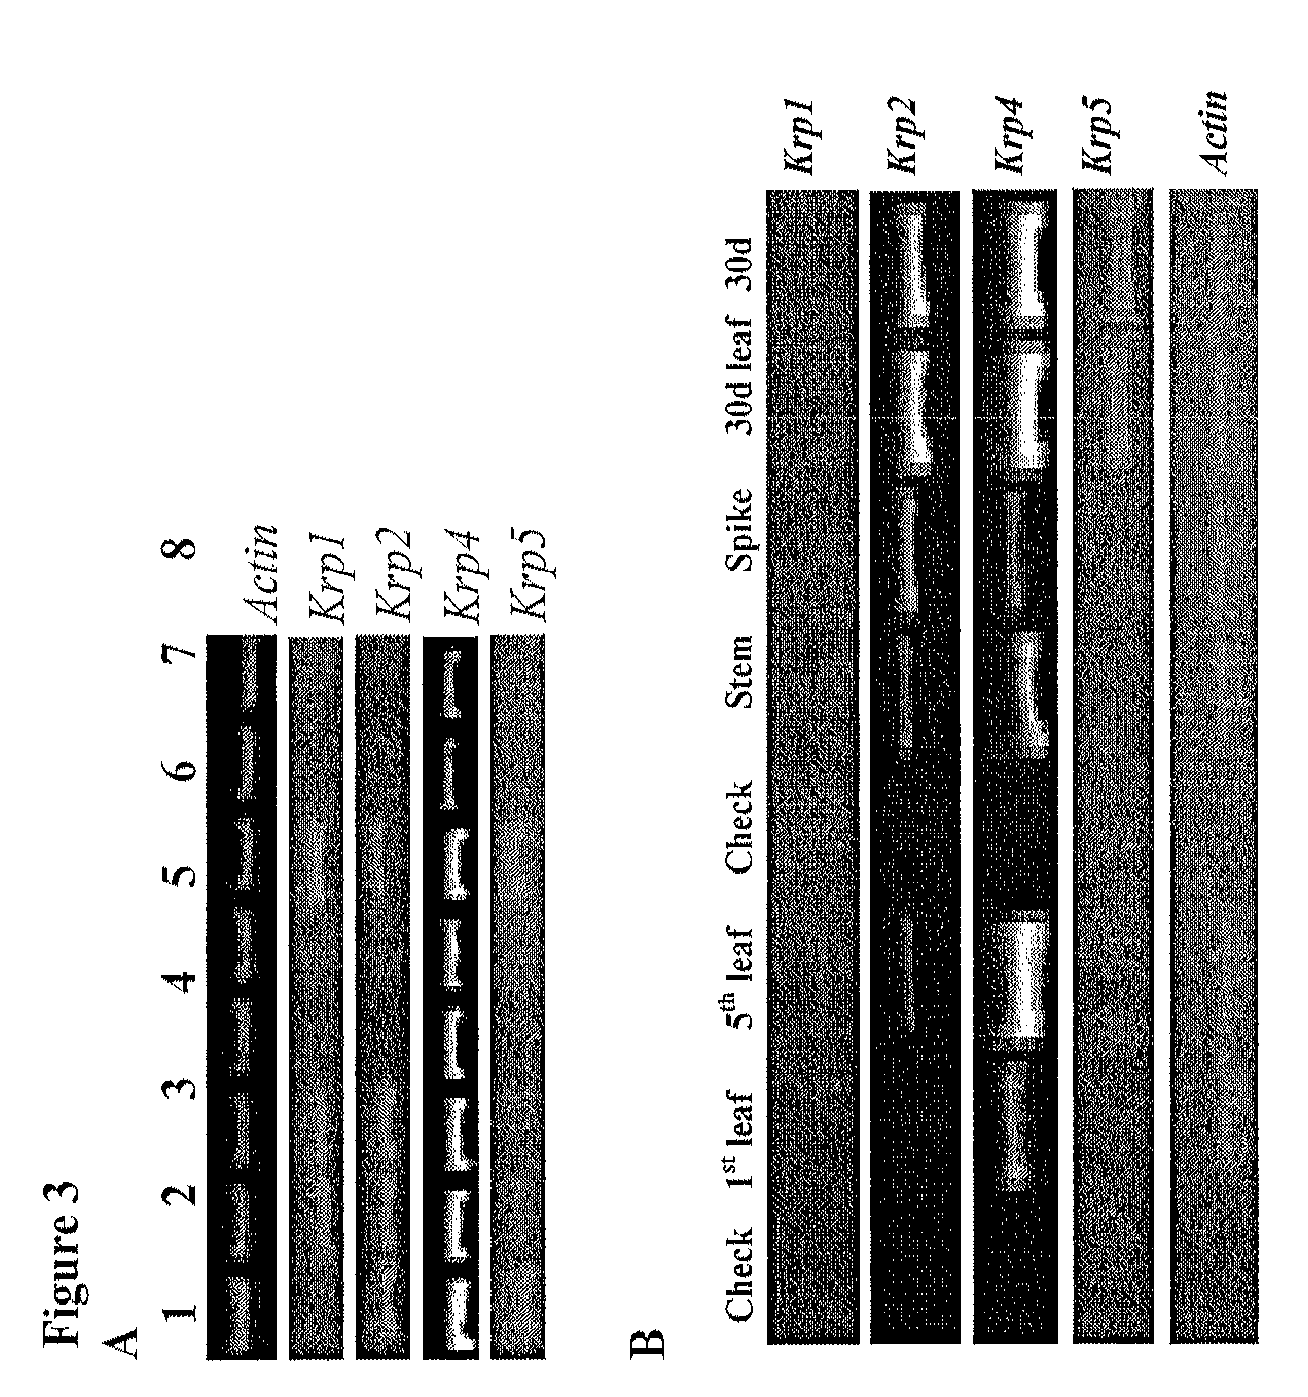 Identification and use of krp mutants in wheat